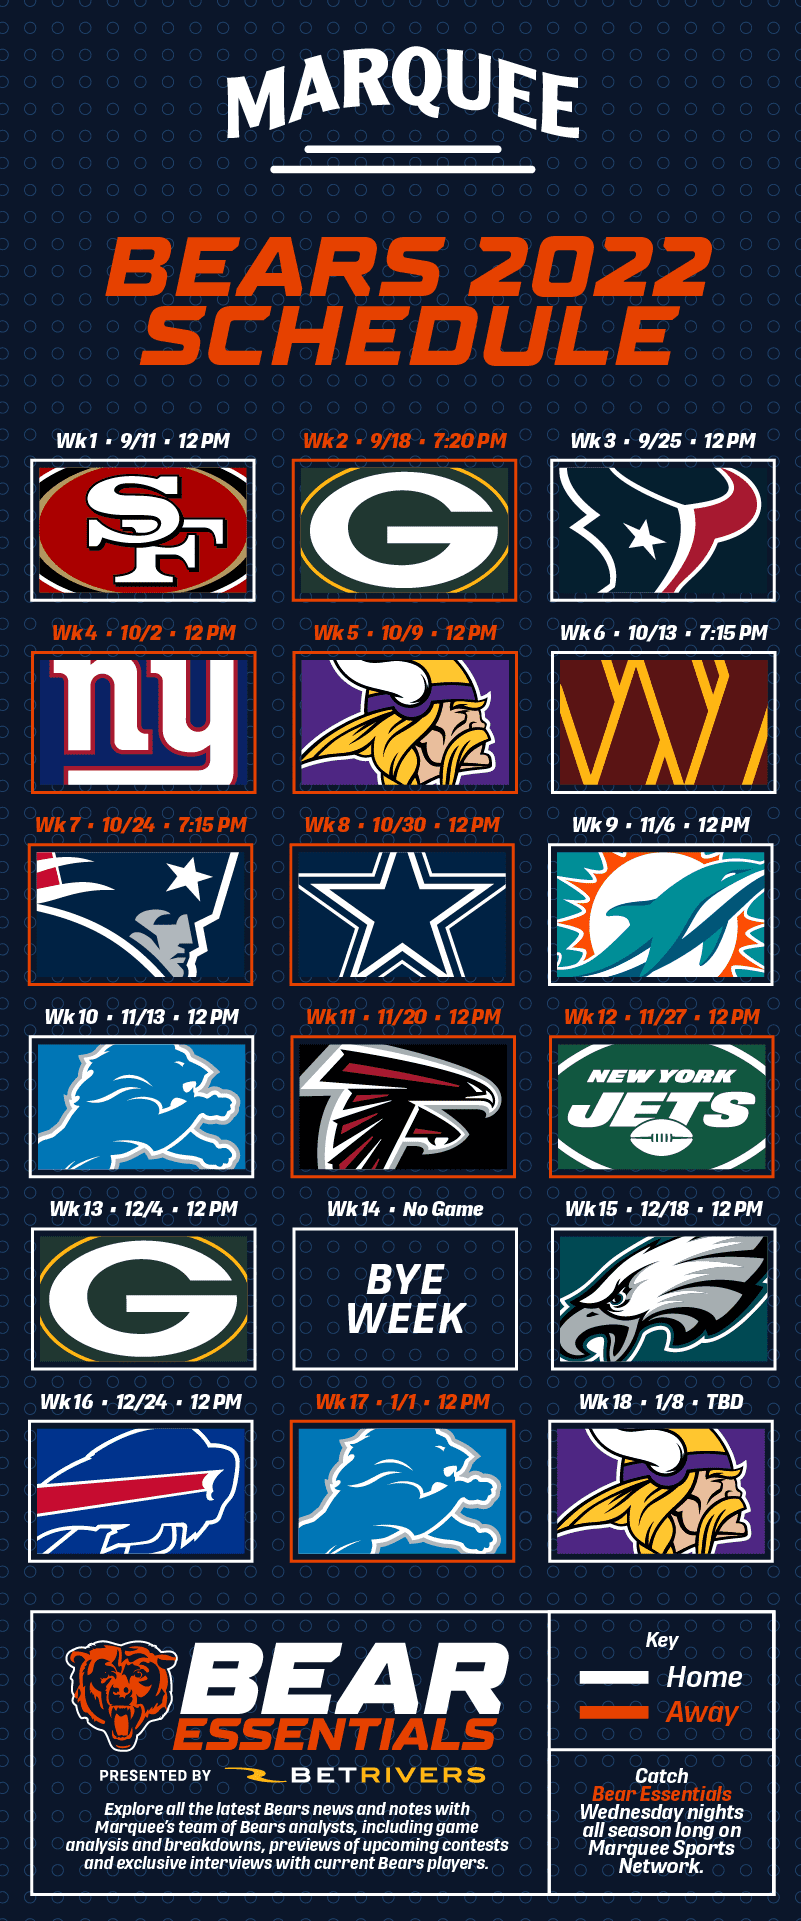 chicago bears home games 2022